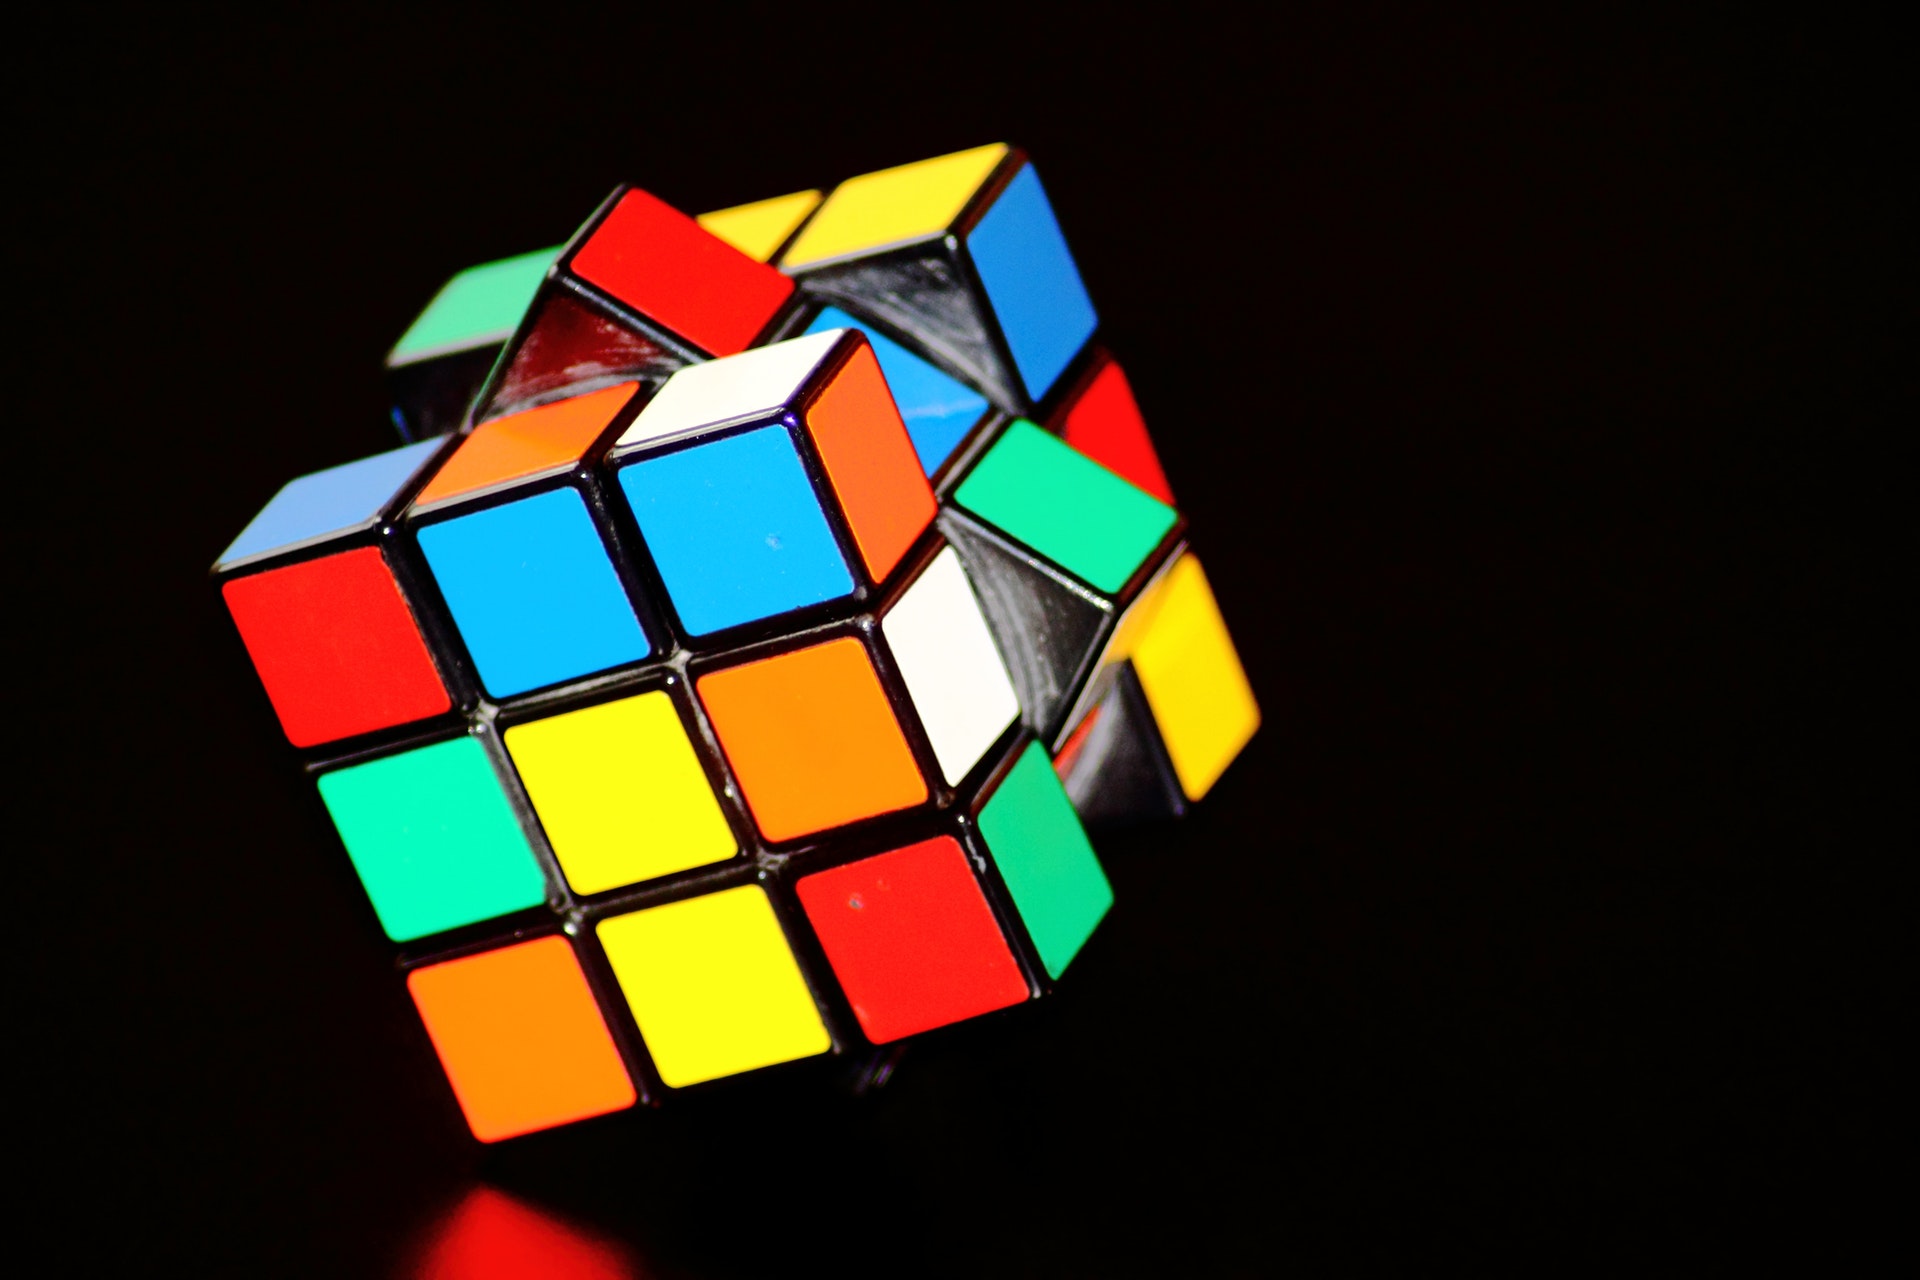 App Rubik’s Cube: If You’re Just Thinking About Apps